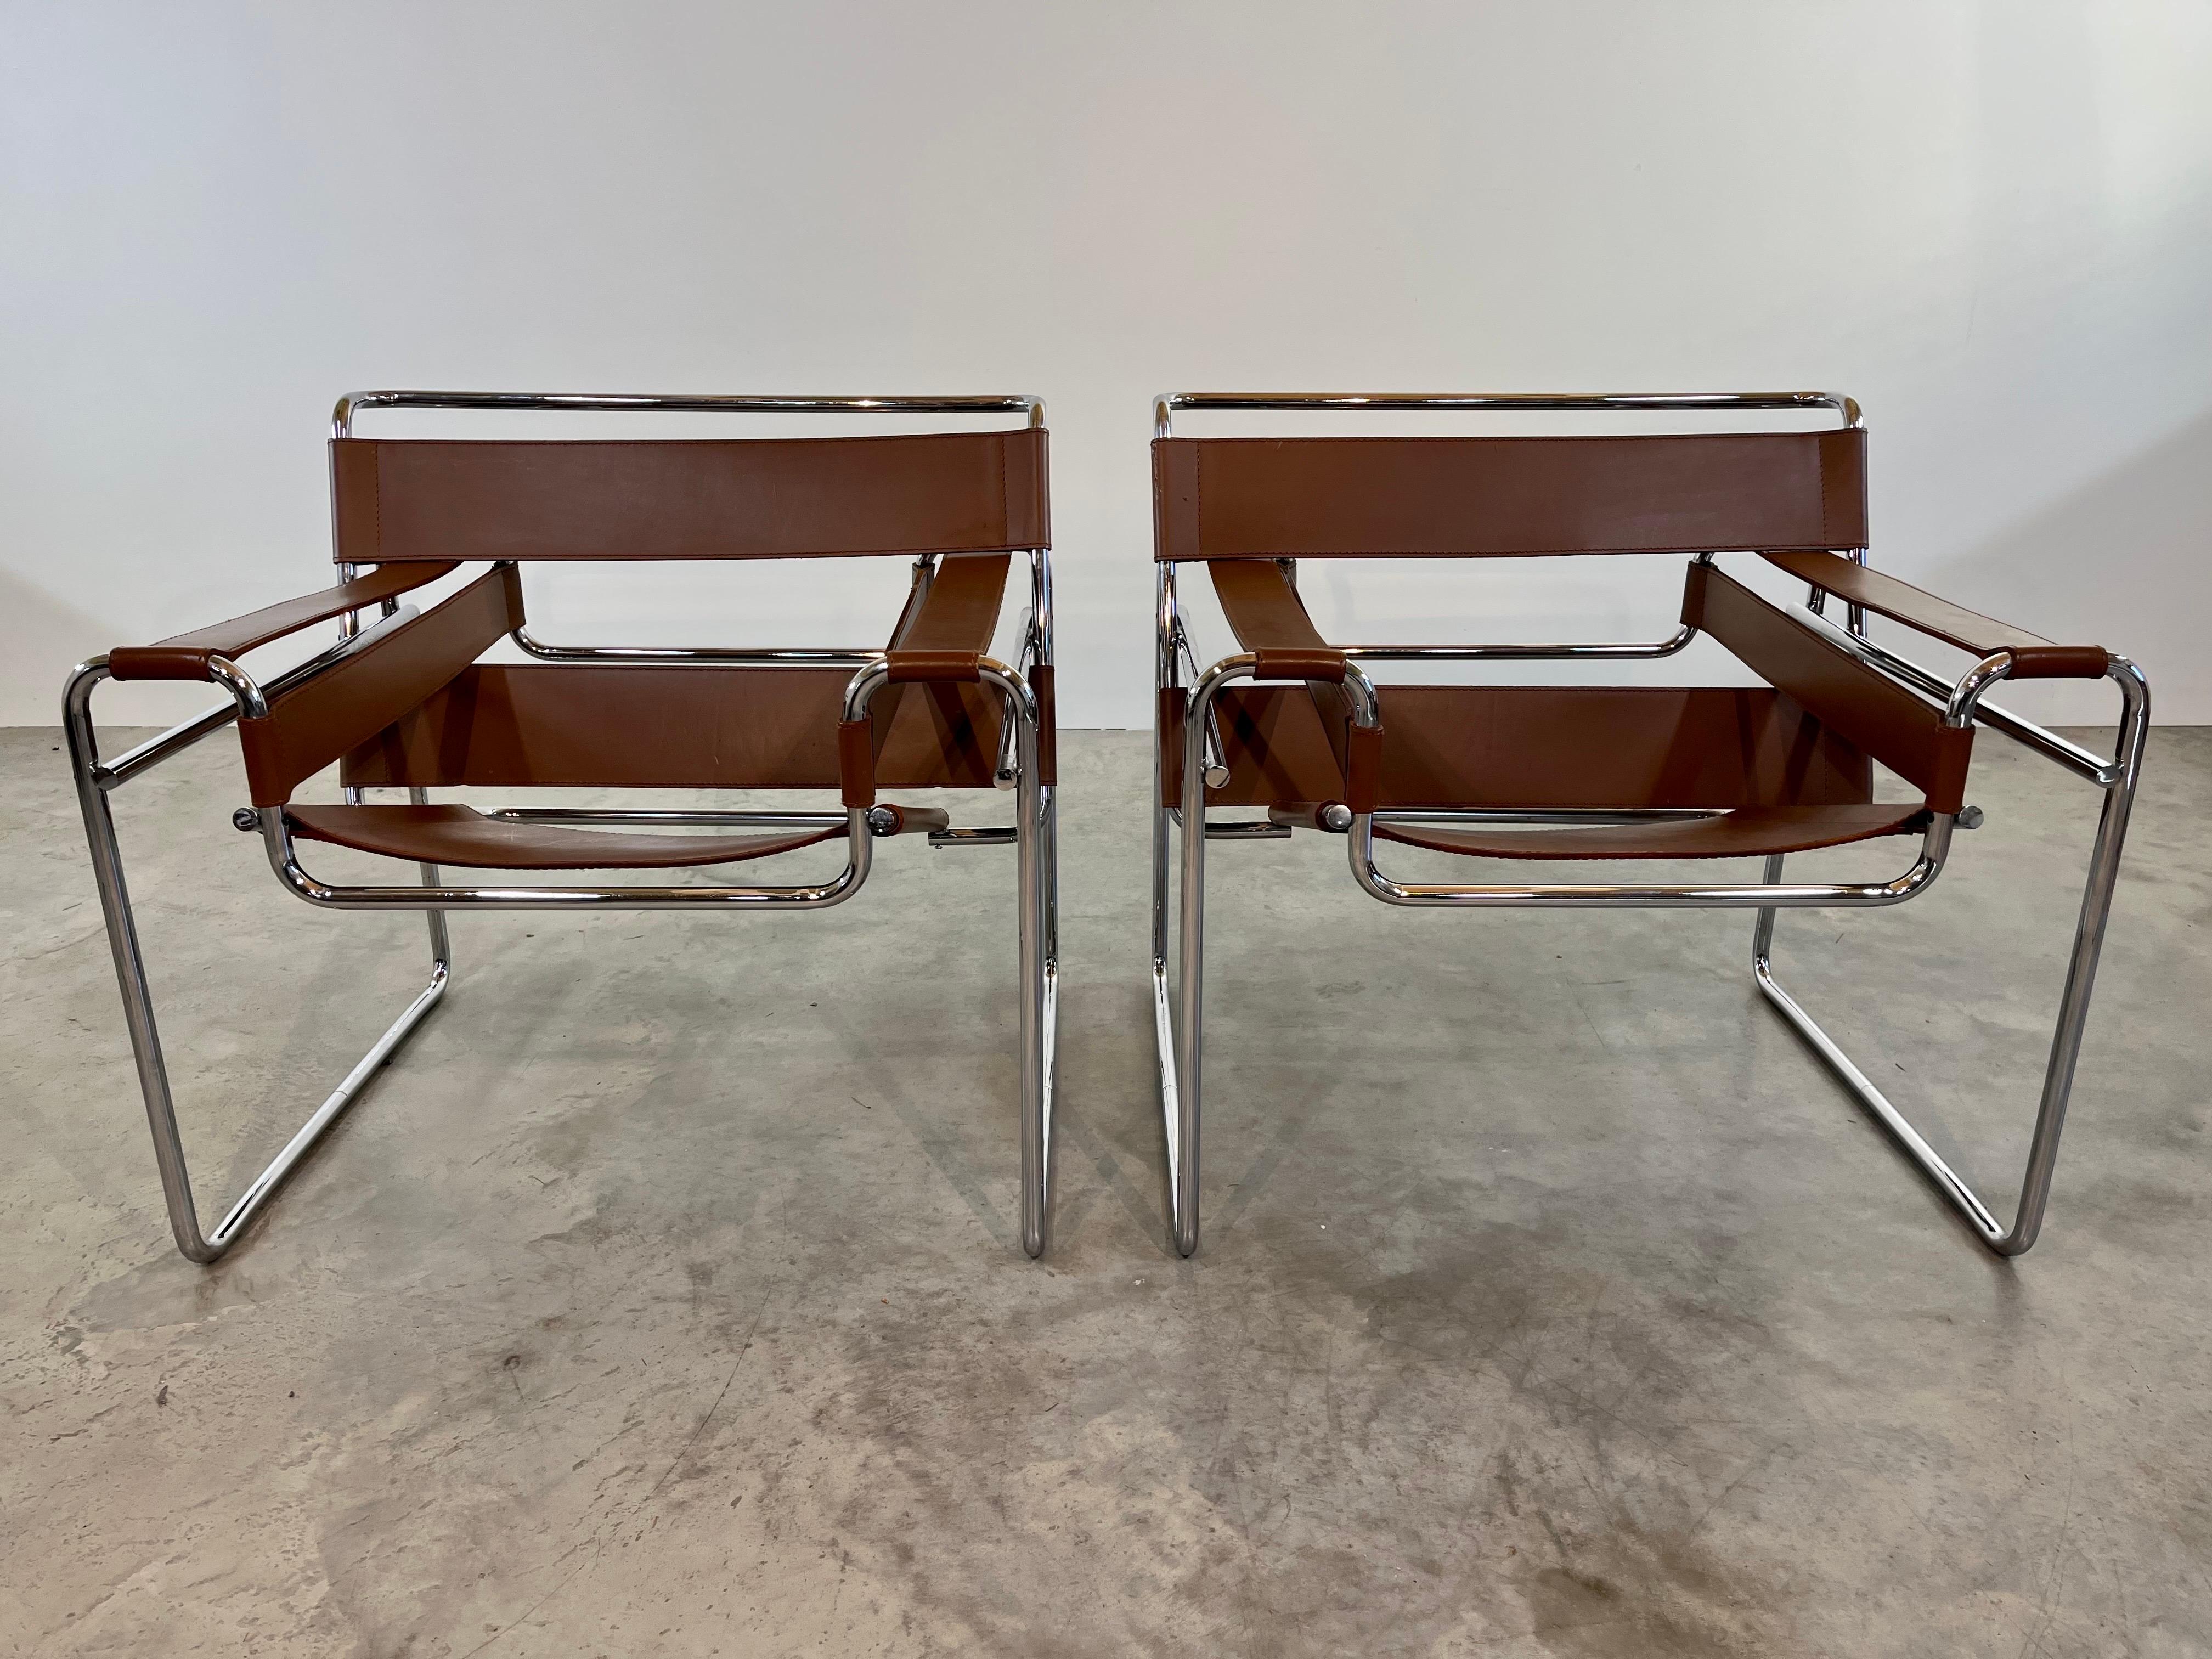 A pair of Wassily Chairs in chocolate saddle leather designed by Marcel Breuer (1902-1981) and manufactured in Italy by Knoll International in 1991. This iconic Marcel Breuer chair was Designed in 1925 and has inspired many designs and designers